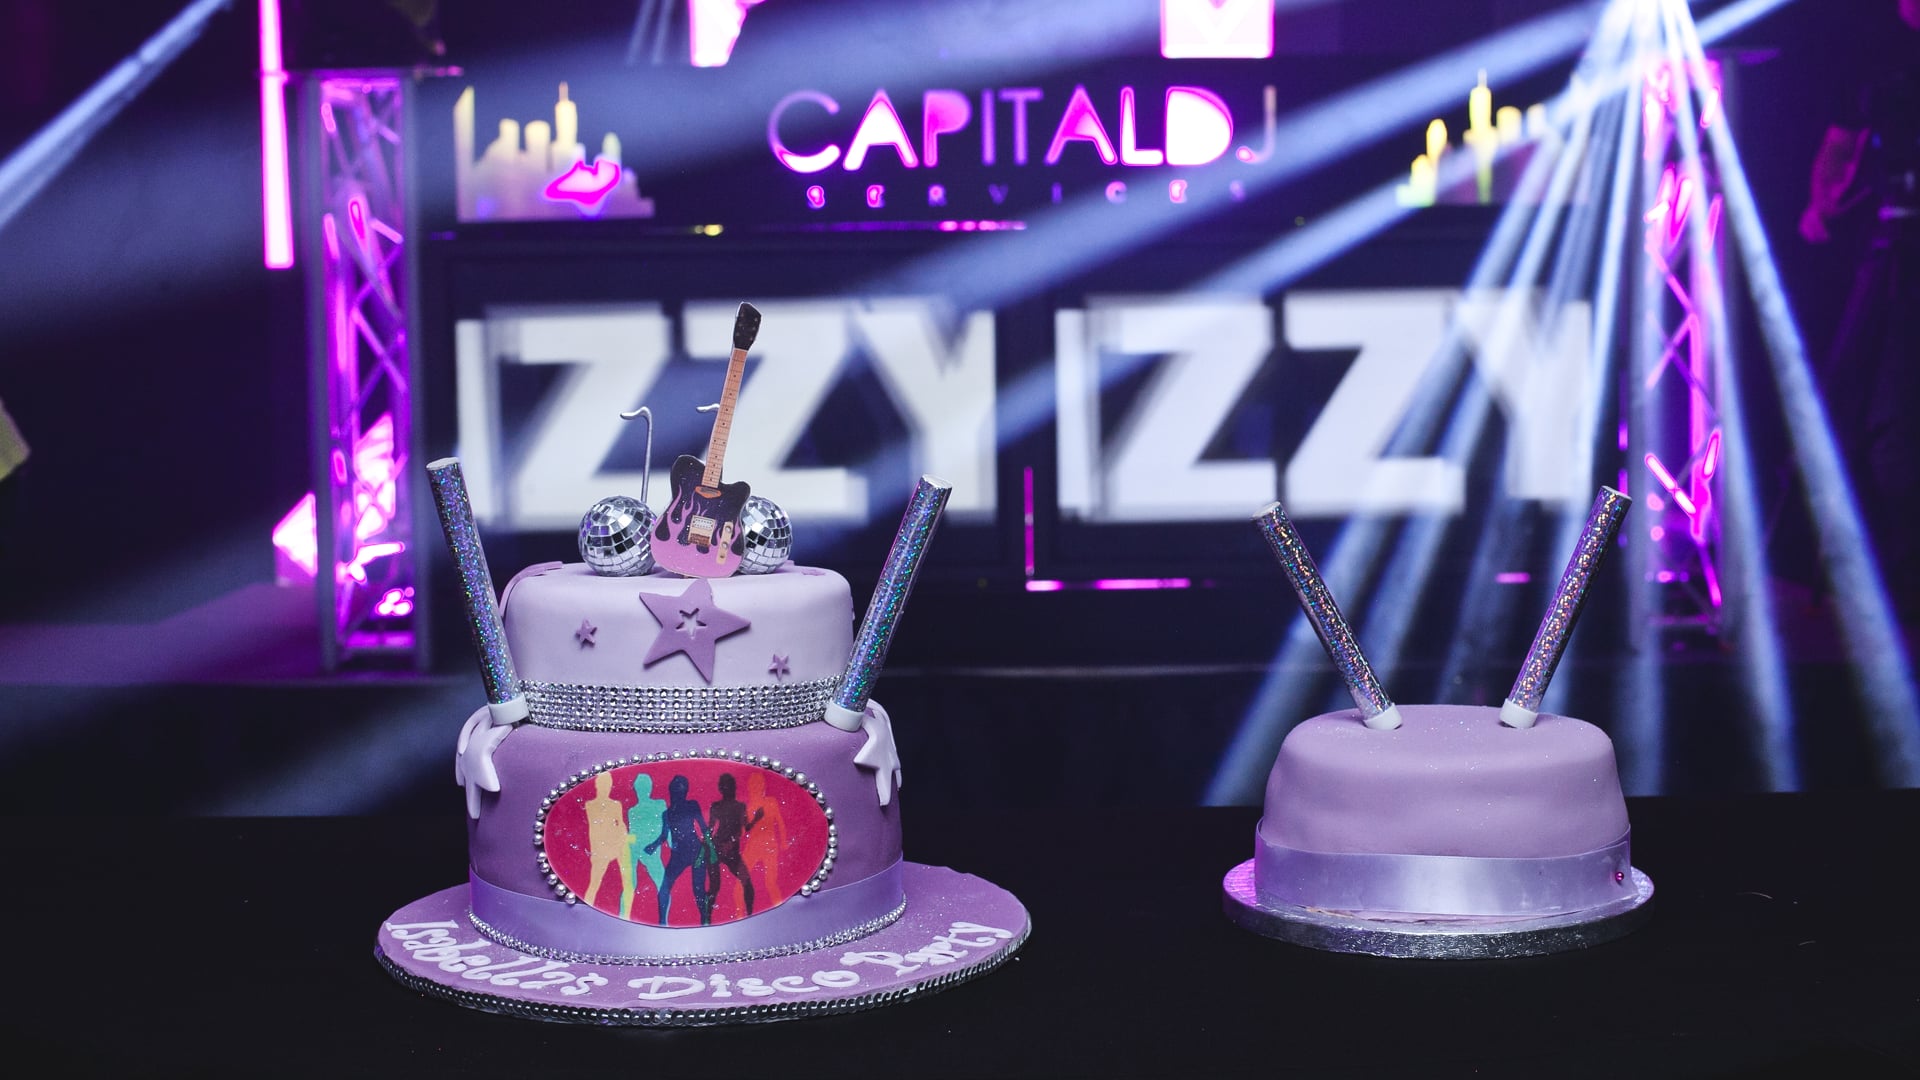 Capital DJ Services Full Event Planning Service (Childrens Party) Izzy's Party (Long Edit)